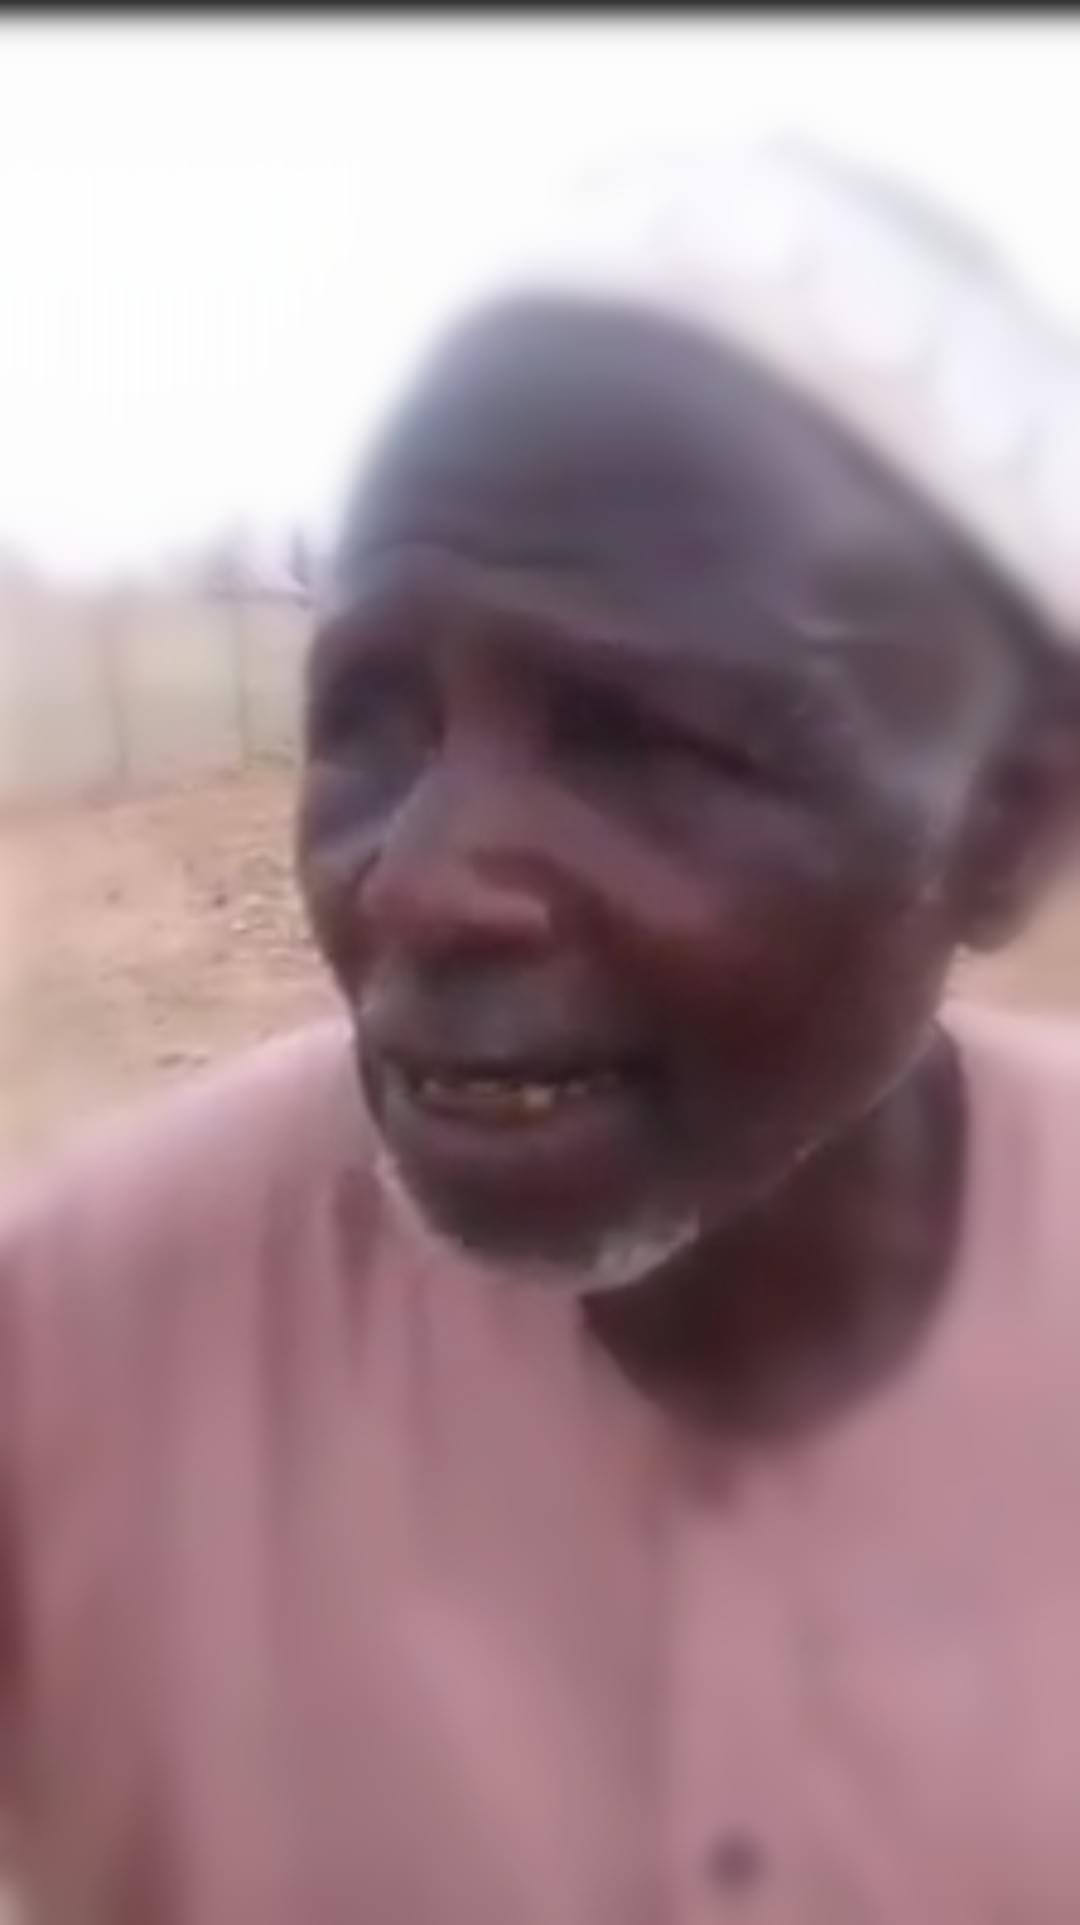 I’ve lost count of underage girls I raped – 62 years old veteran rapist confesses.